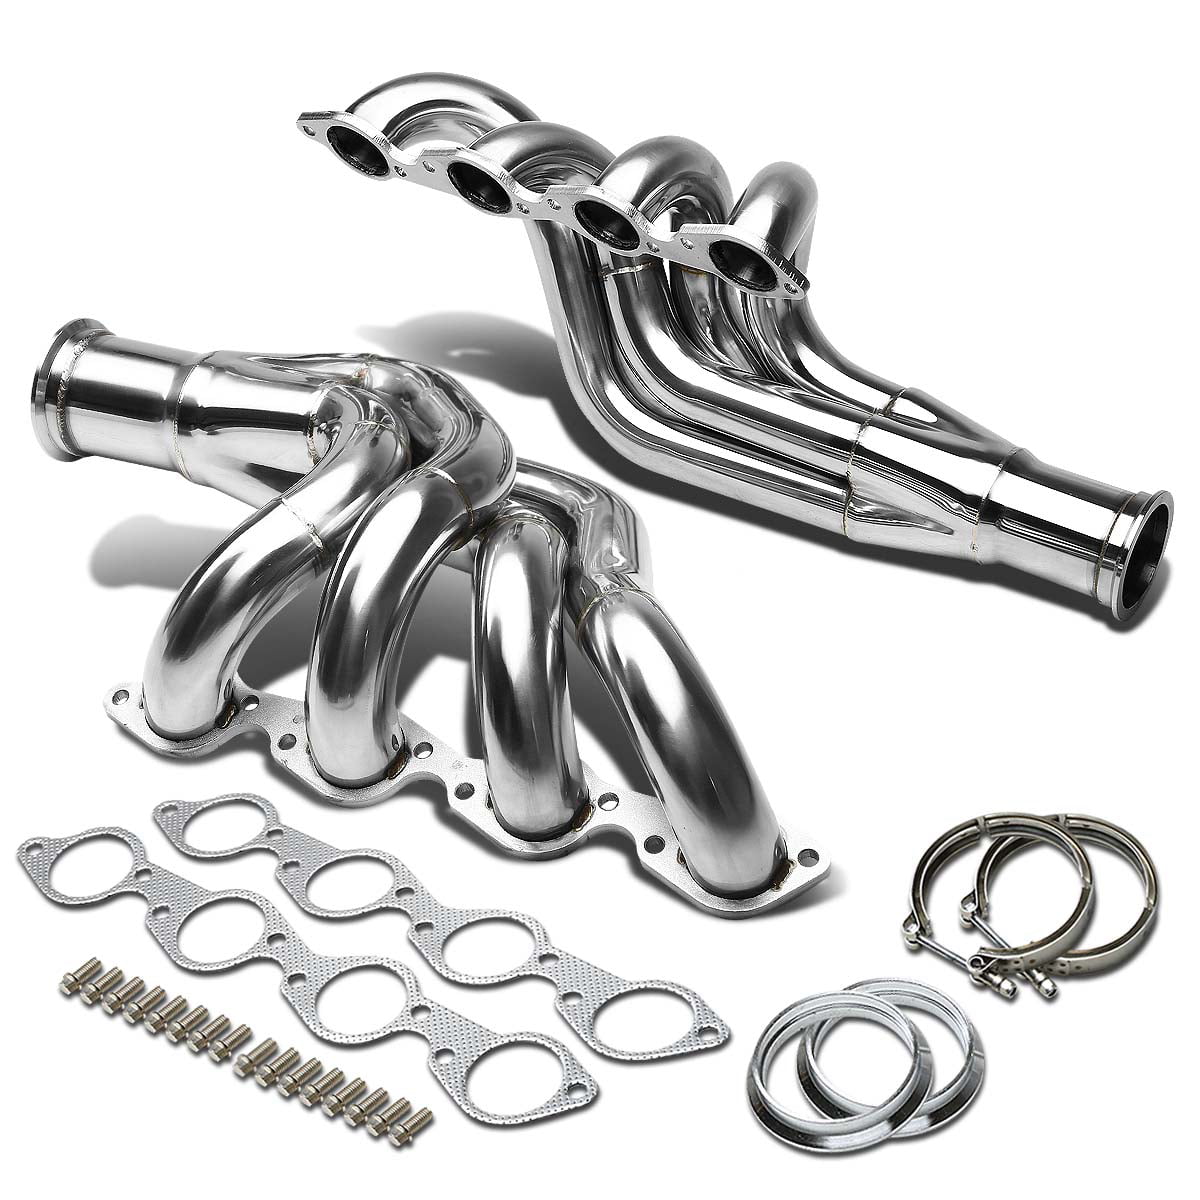 DNA MOTORING HDS-NT04-56L-LT Stainless Steel Header Exhaust Manifold 